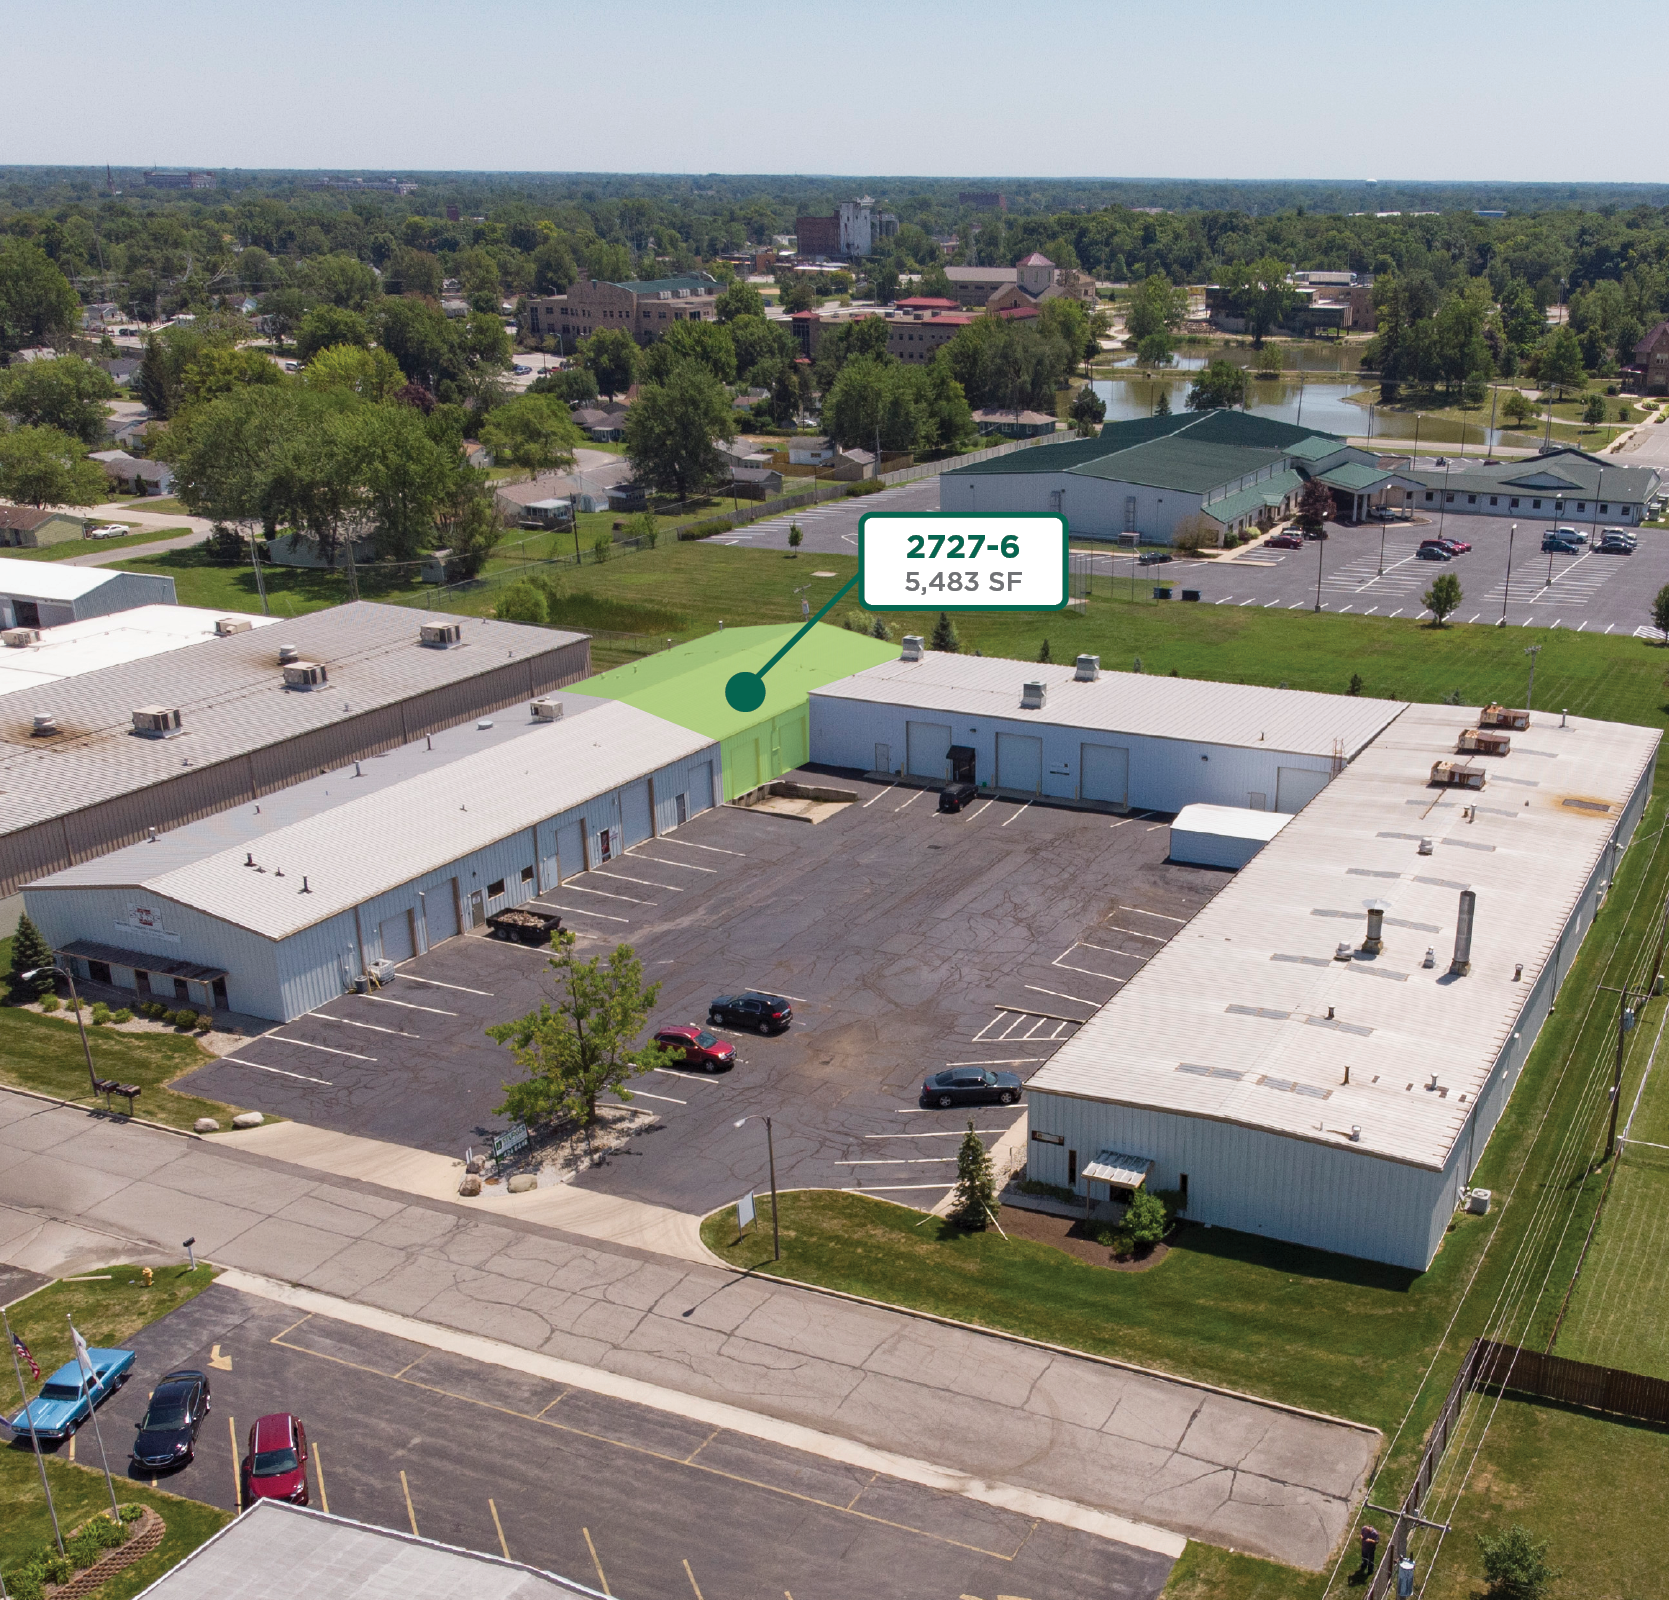 Sturges Property Group - Lofty Drive Industrial Space For Lease in Fort Wayne, IN 46808